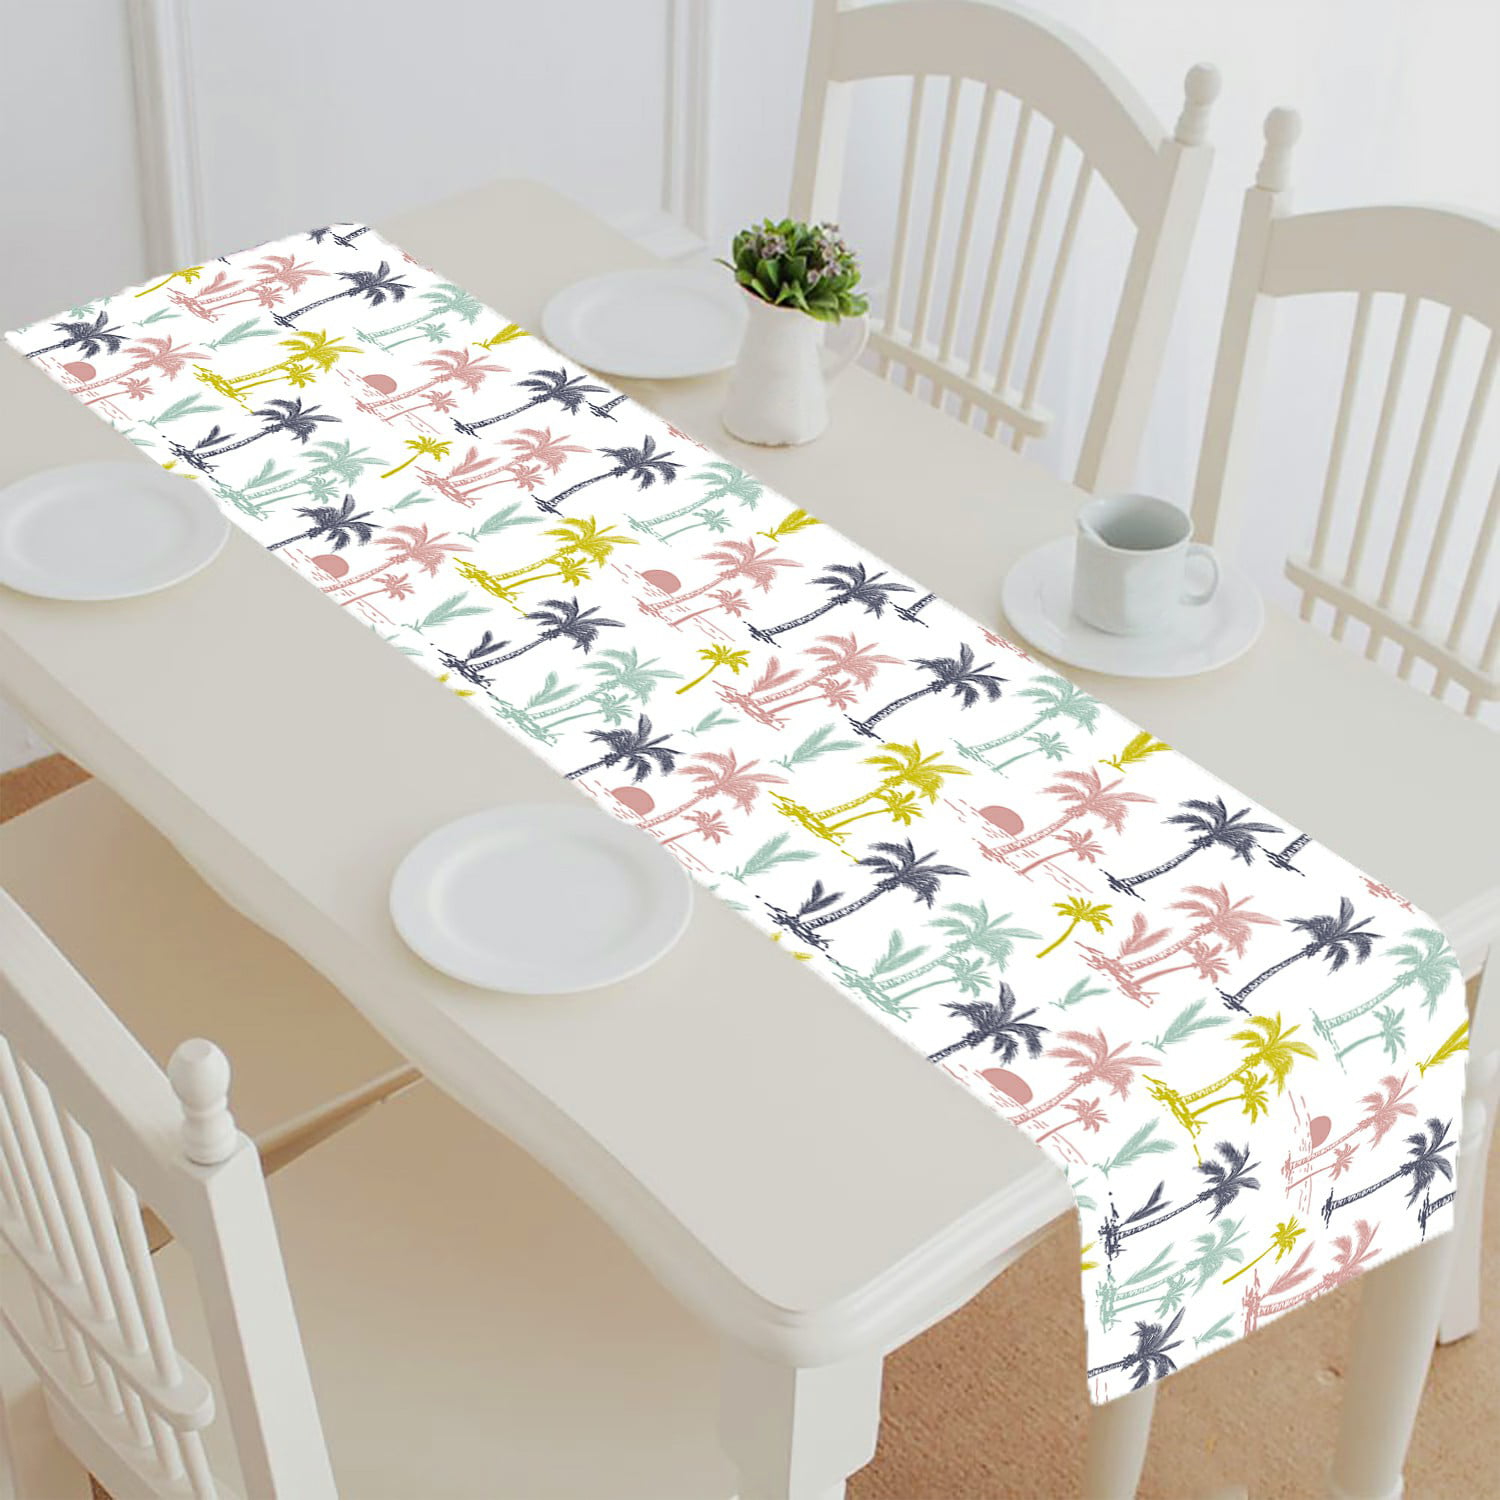 Cat On Roof Tablecloth Table Cloth for Rectangle Tables Waterproof Durable Flower Table Cover for Kitchen Dining Room 54 X 72 Inch